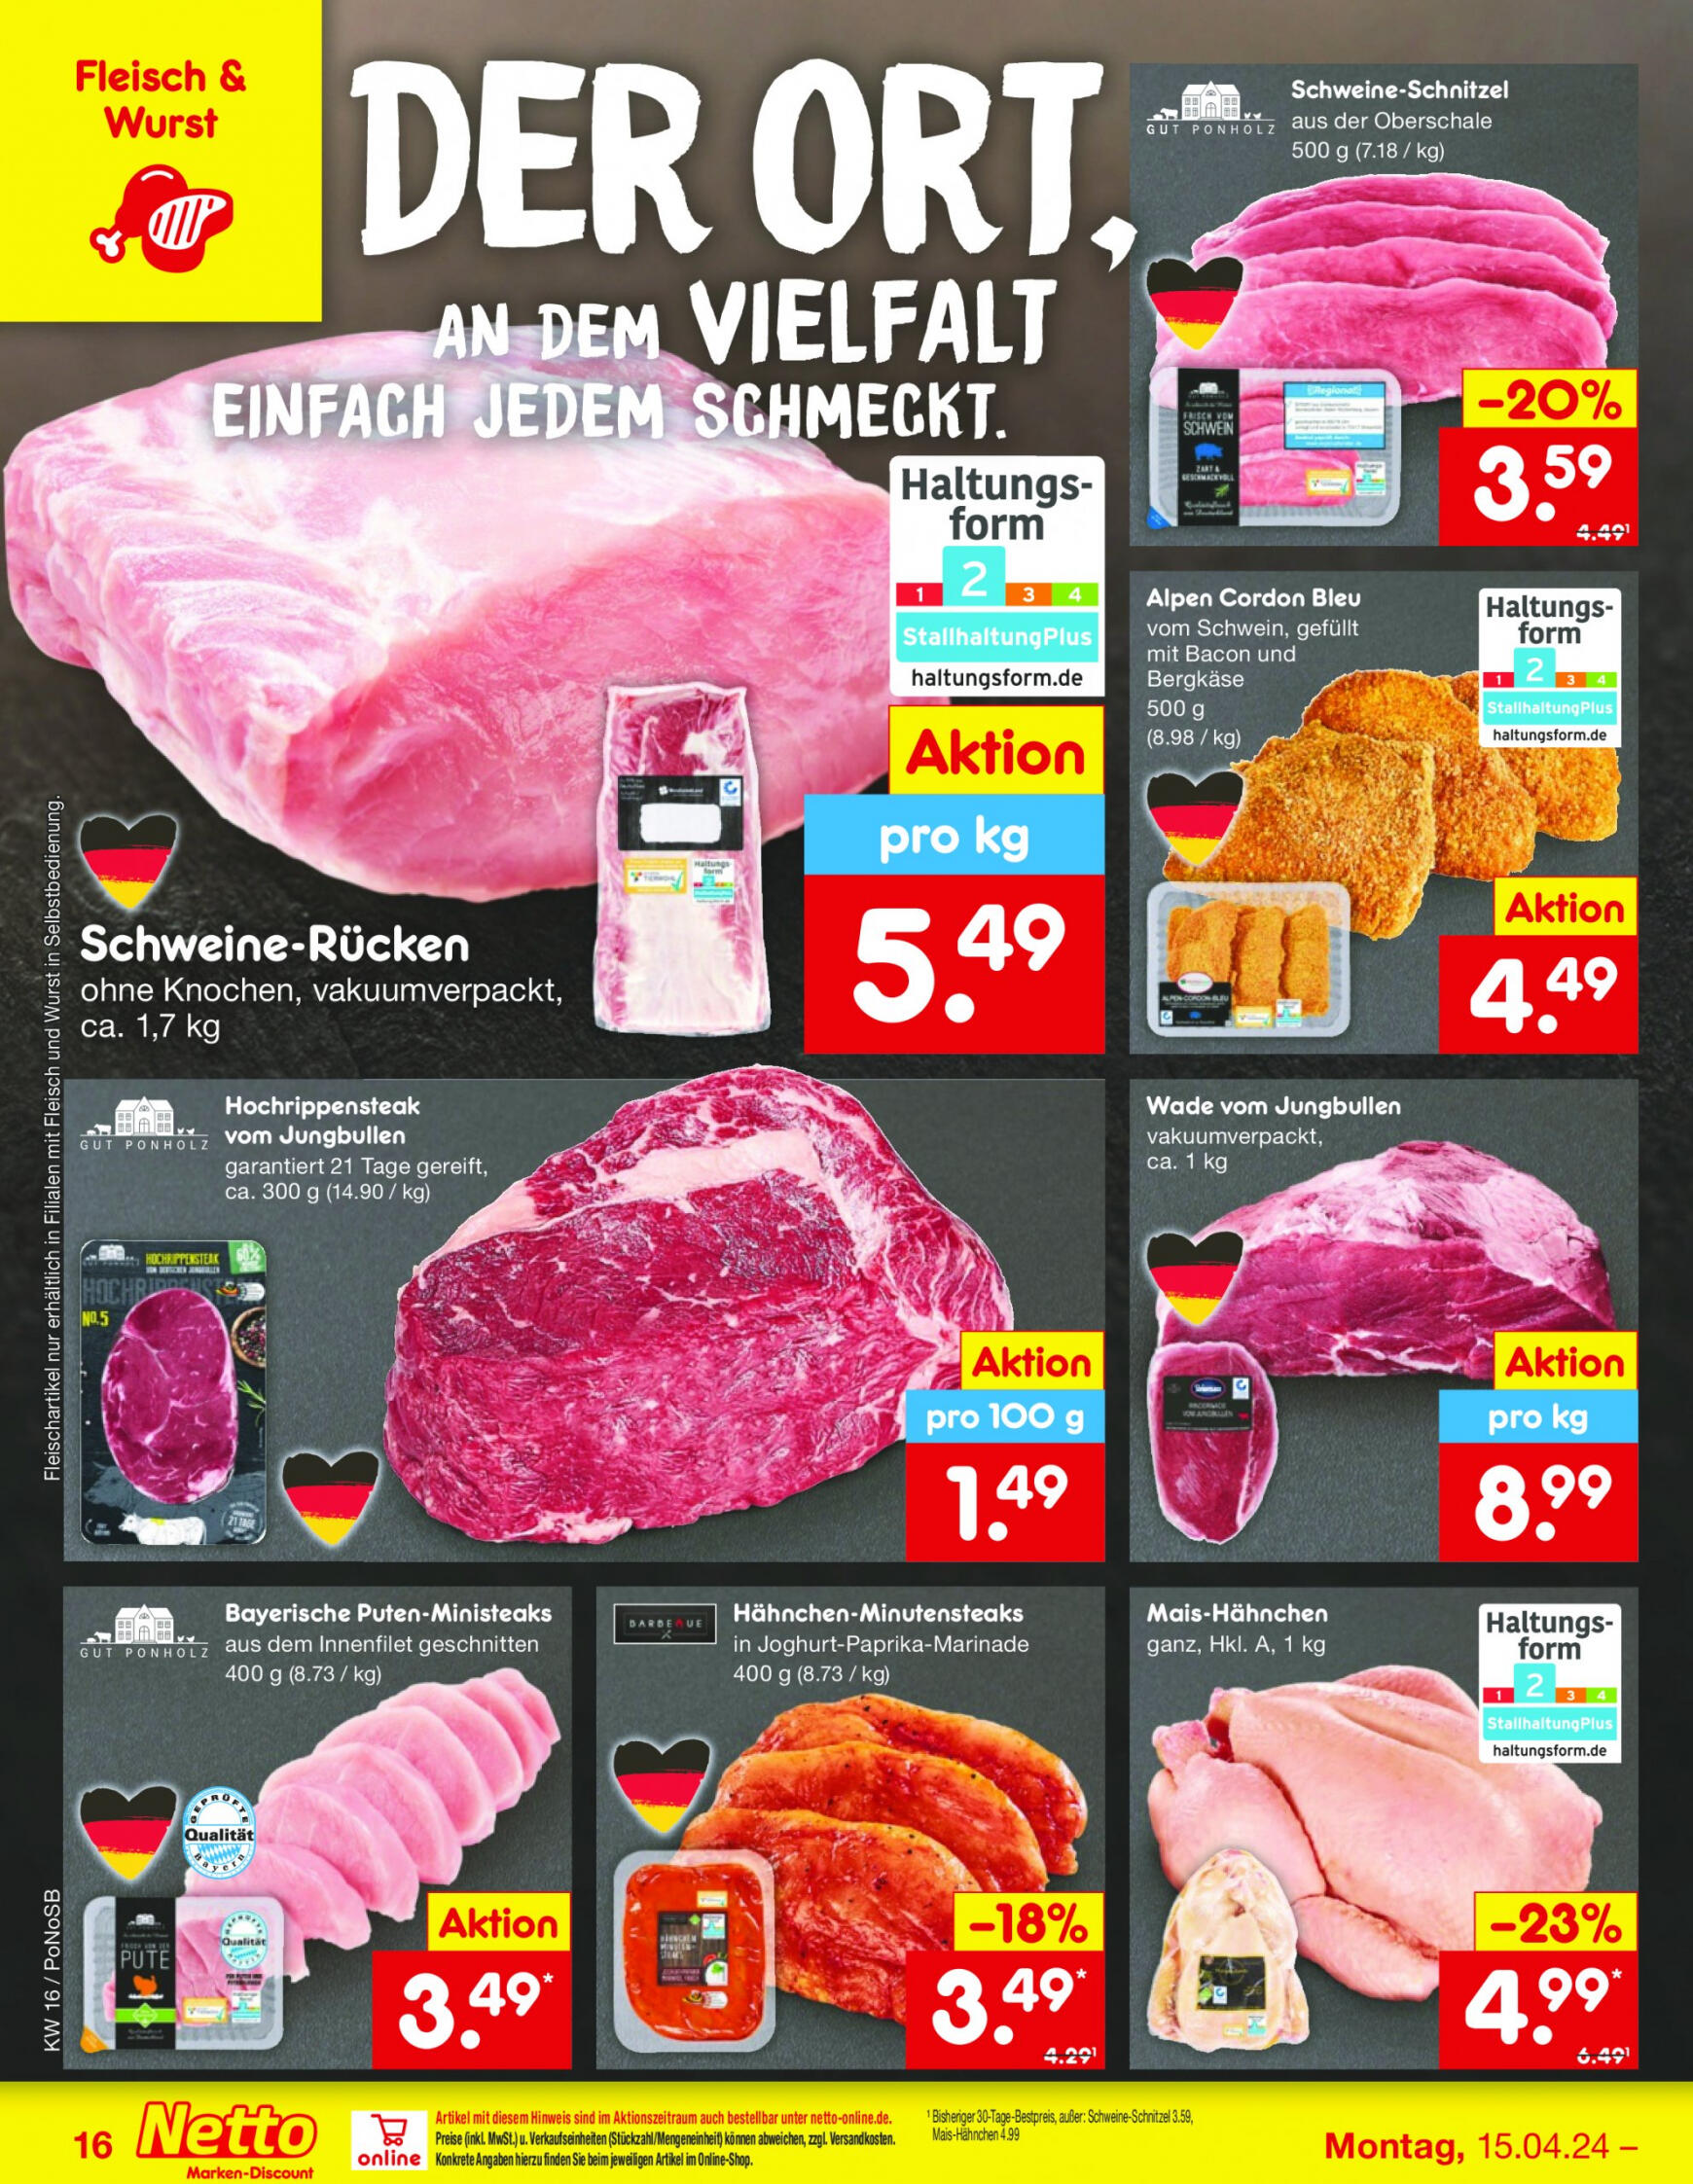 netto - Flyer Netto aktuell 15.04. - 20.04. - page: 18